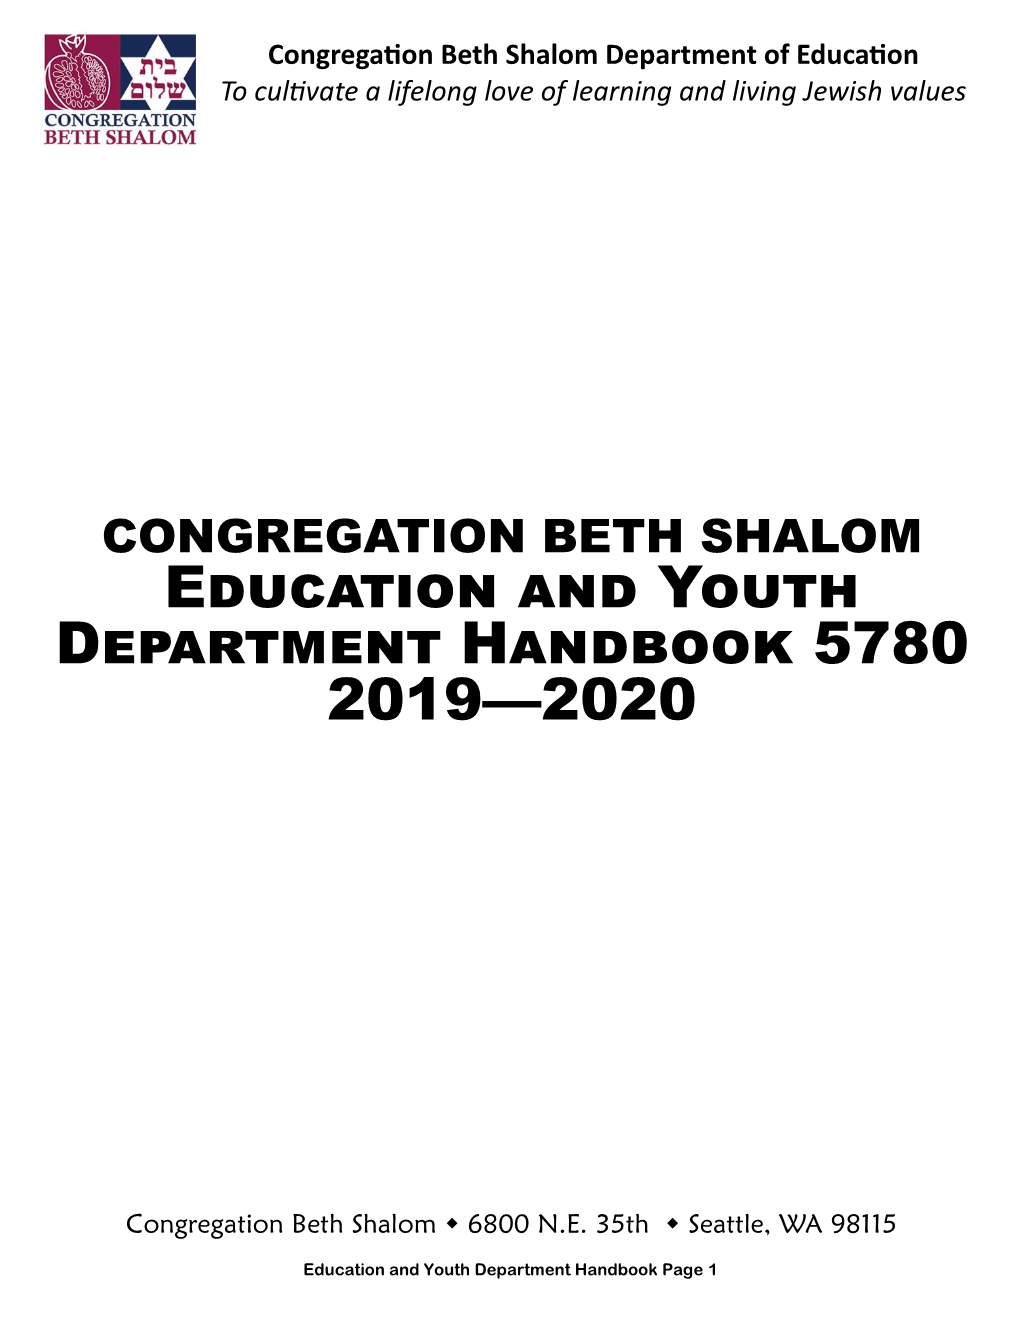 Education and Youth Department Handbook 5780 2019—2020